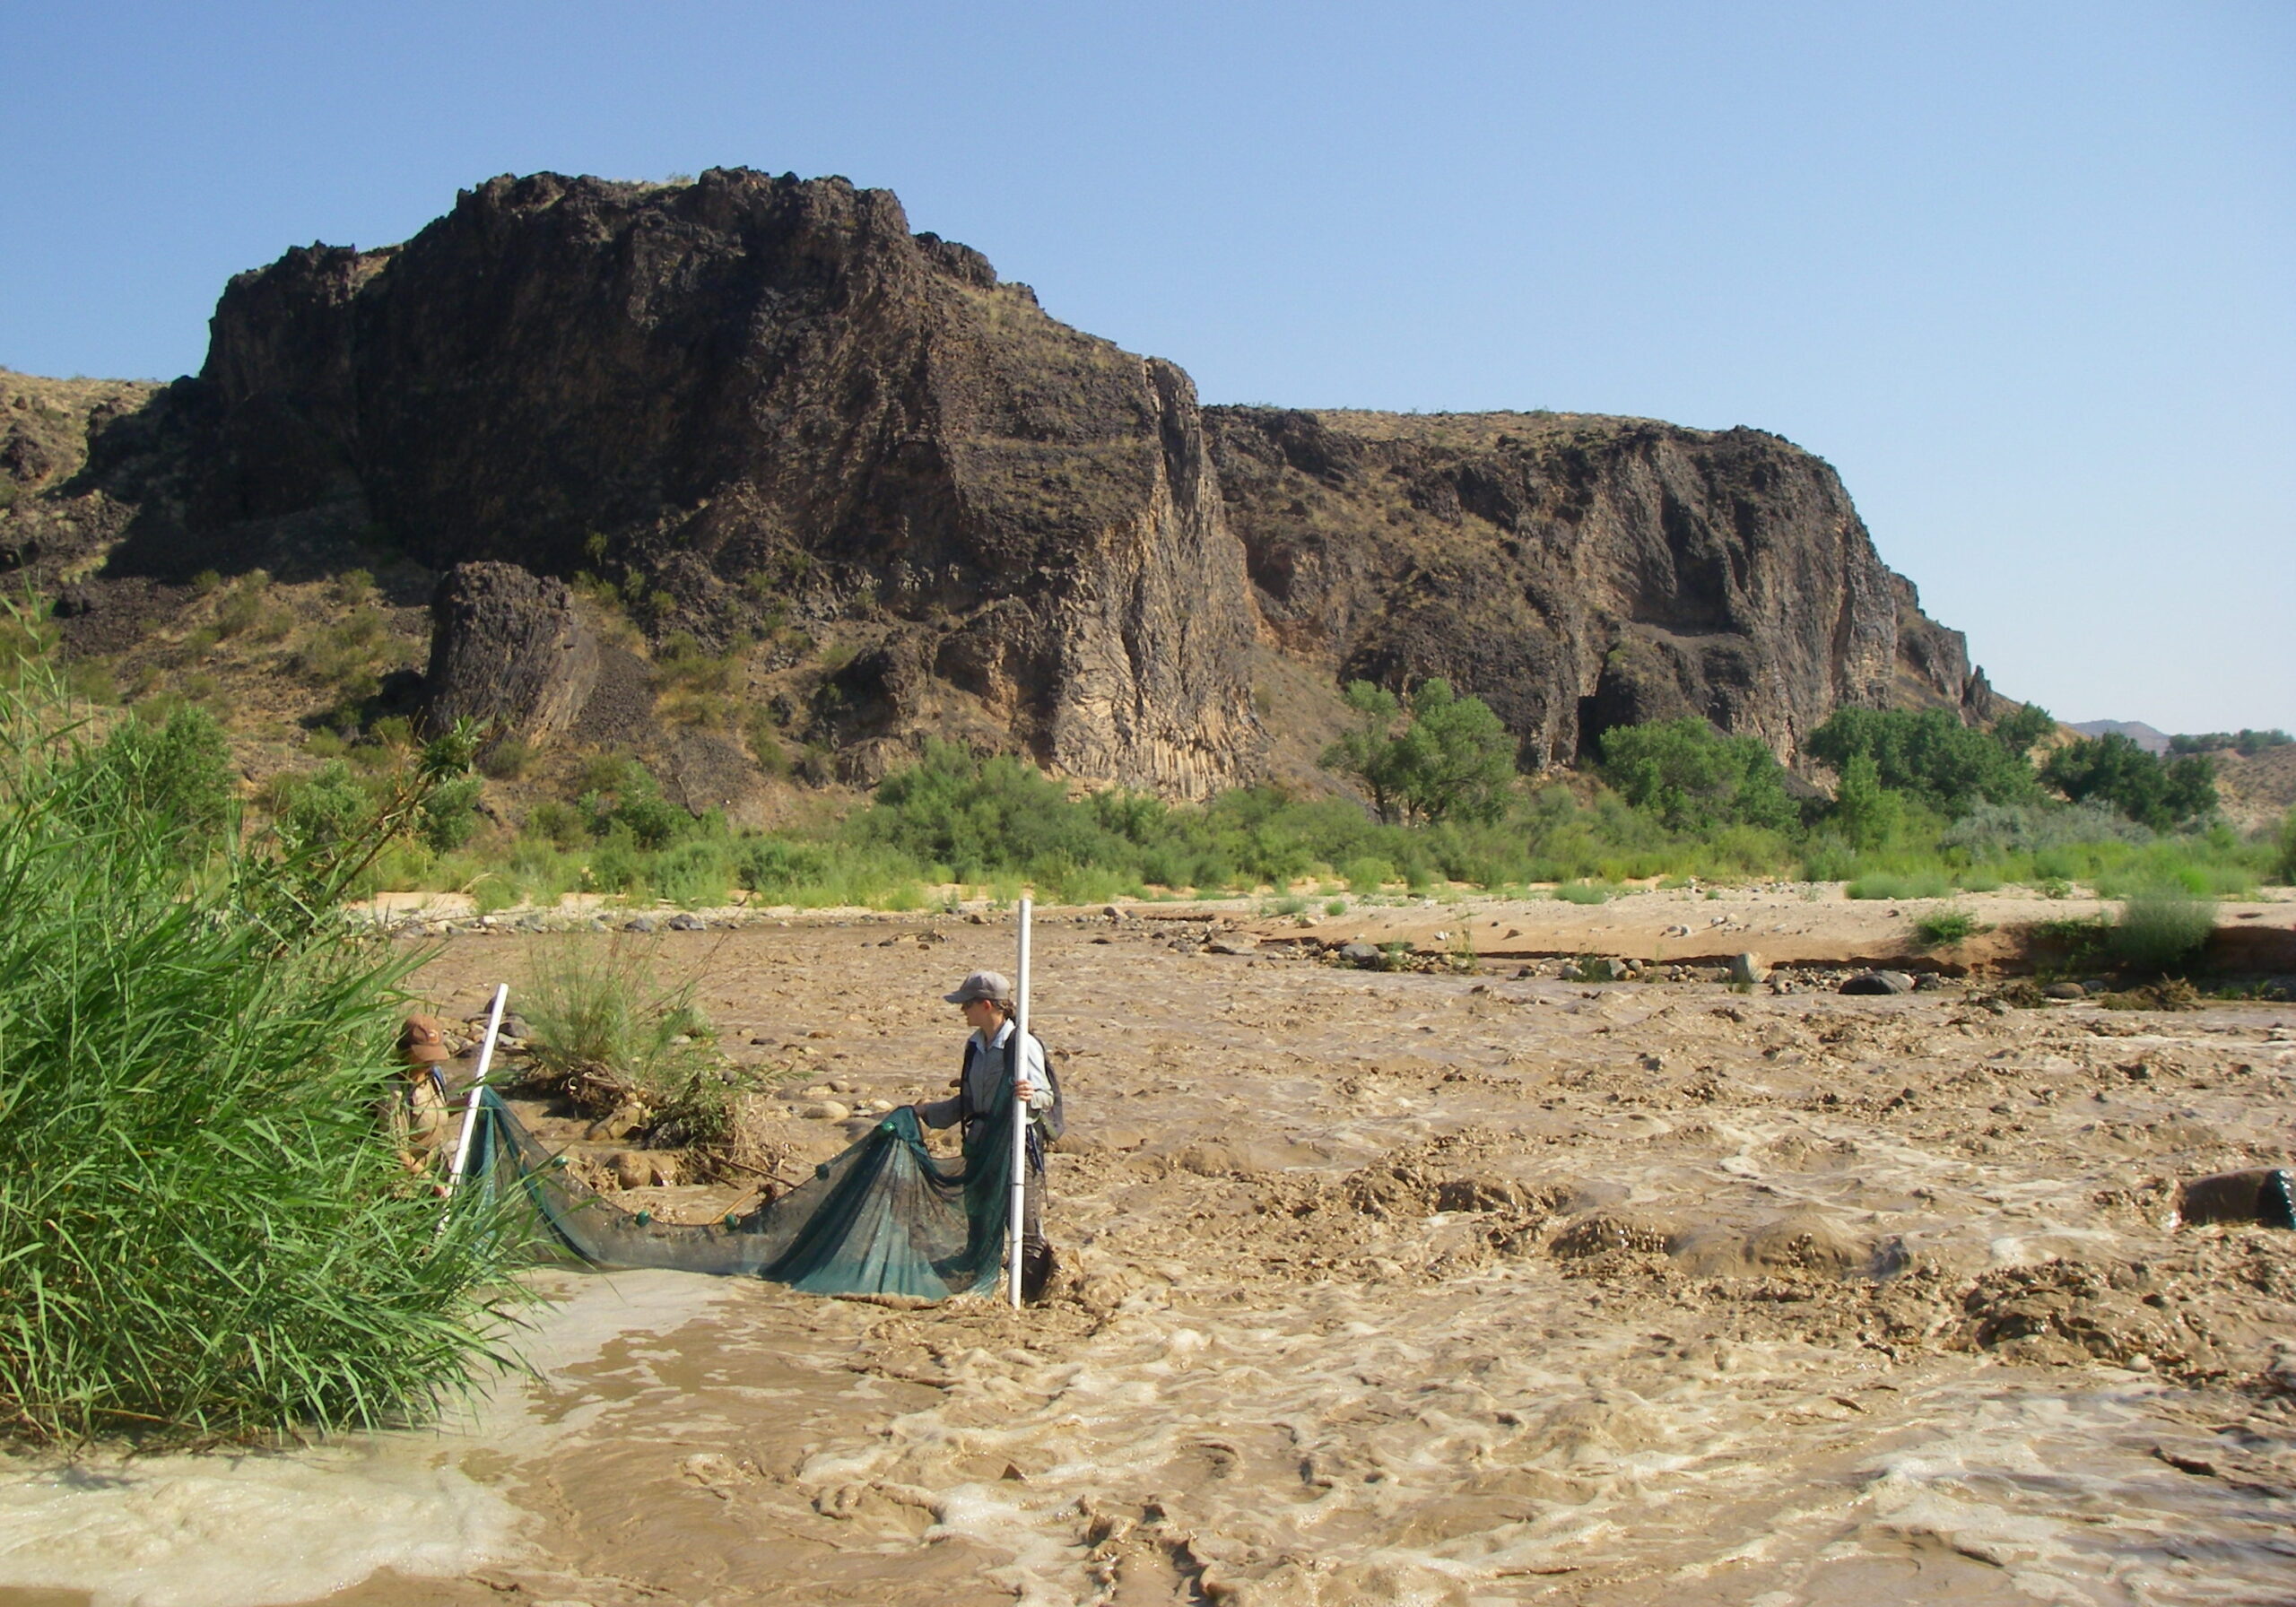 <i/>Biologists seining the Virgin River</i><br>
<small> By: Utah Division of Wildlife Resources</small>